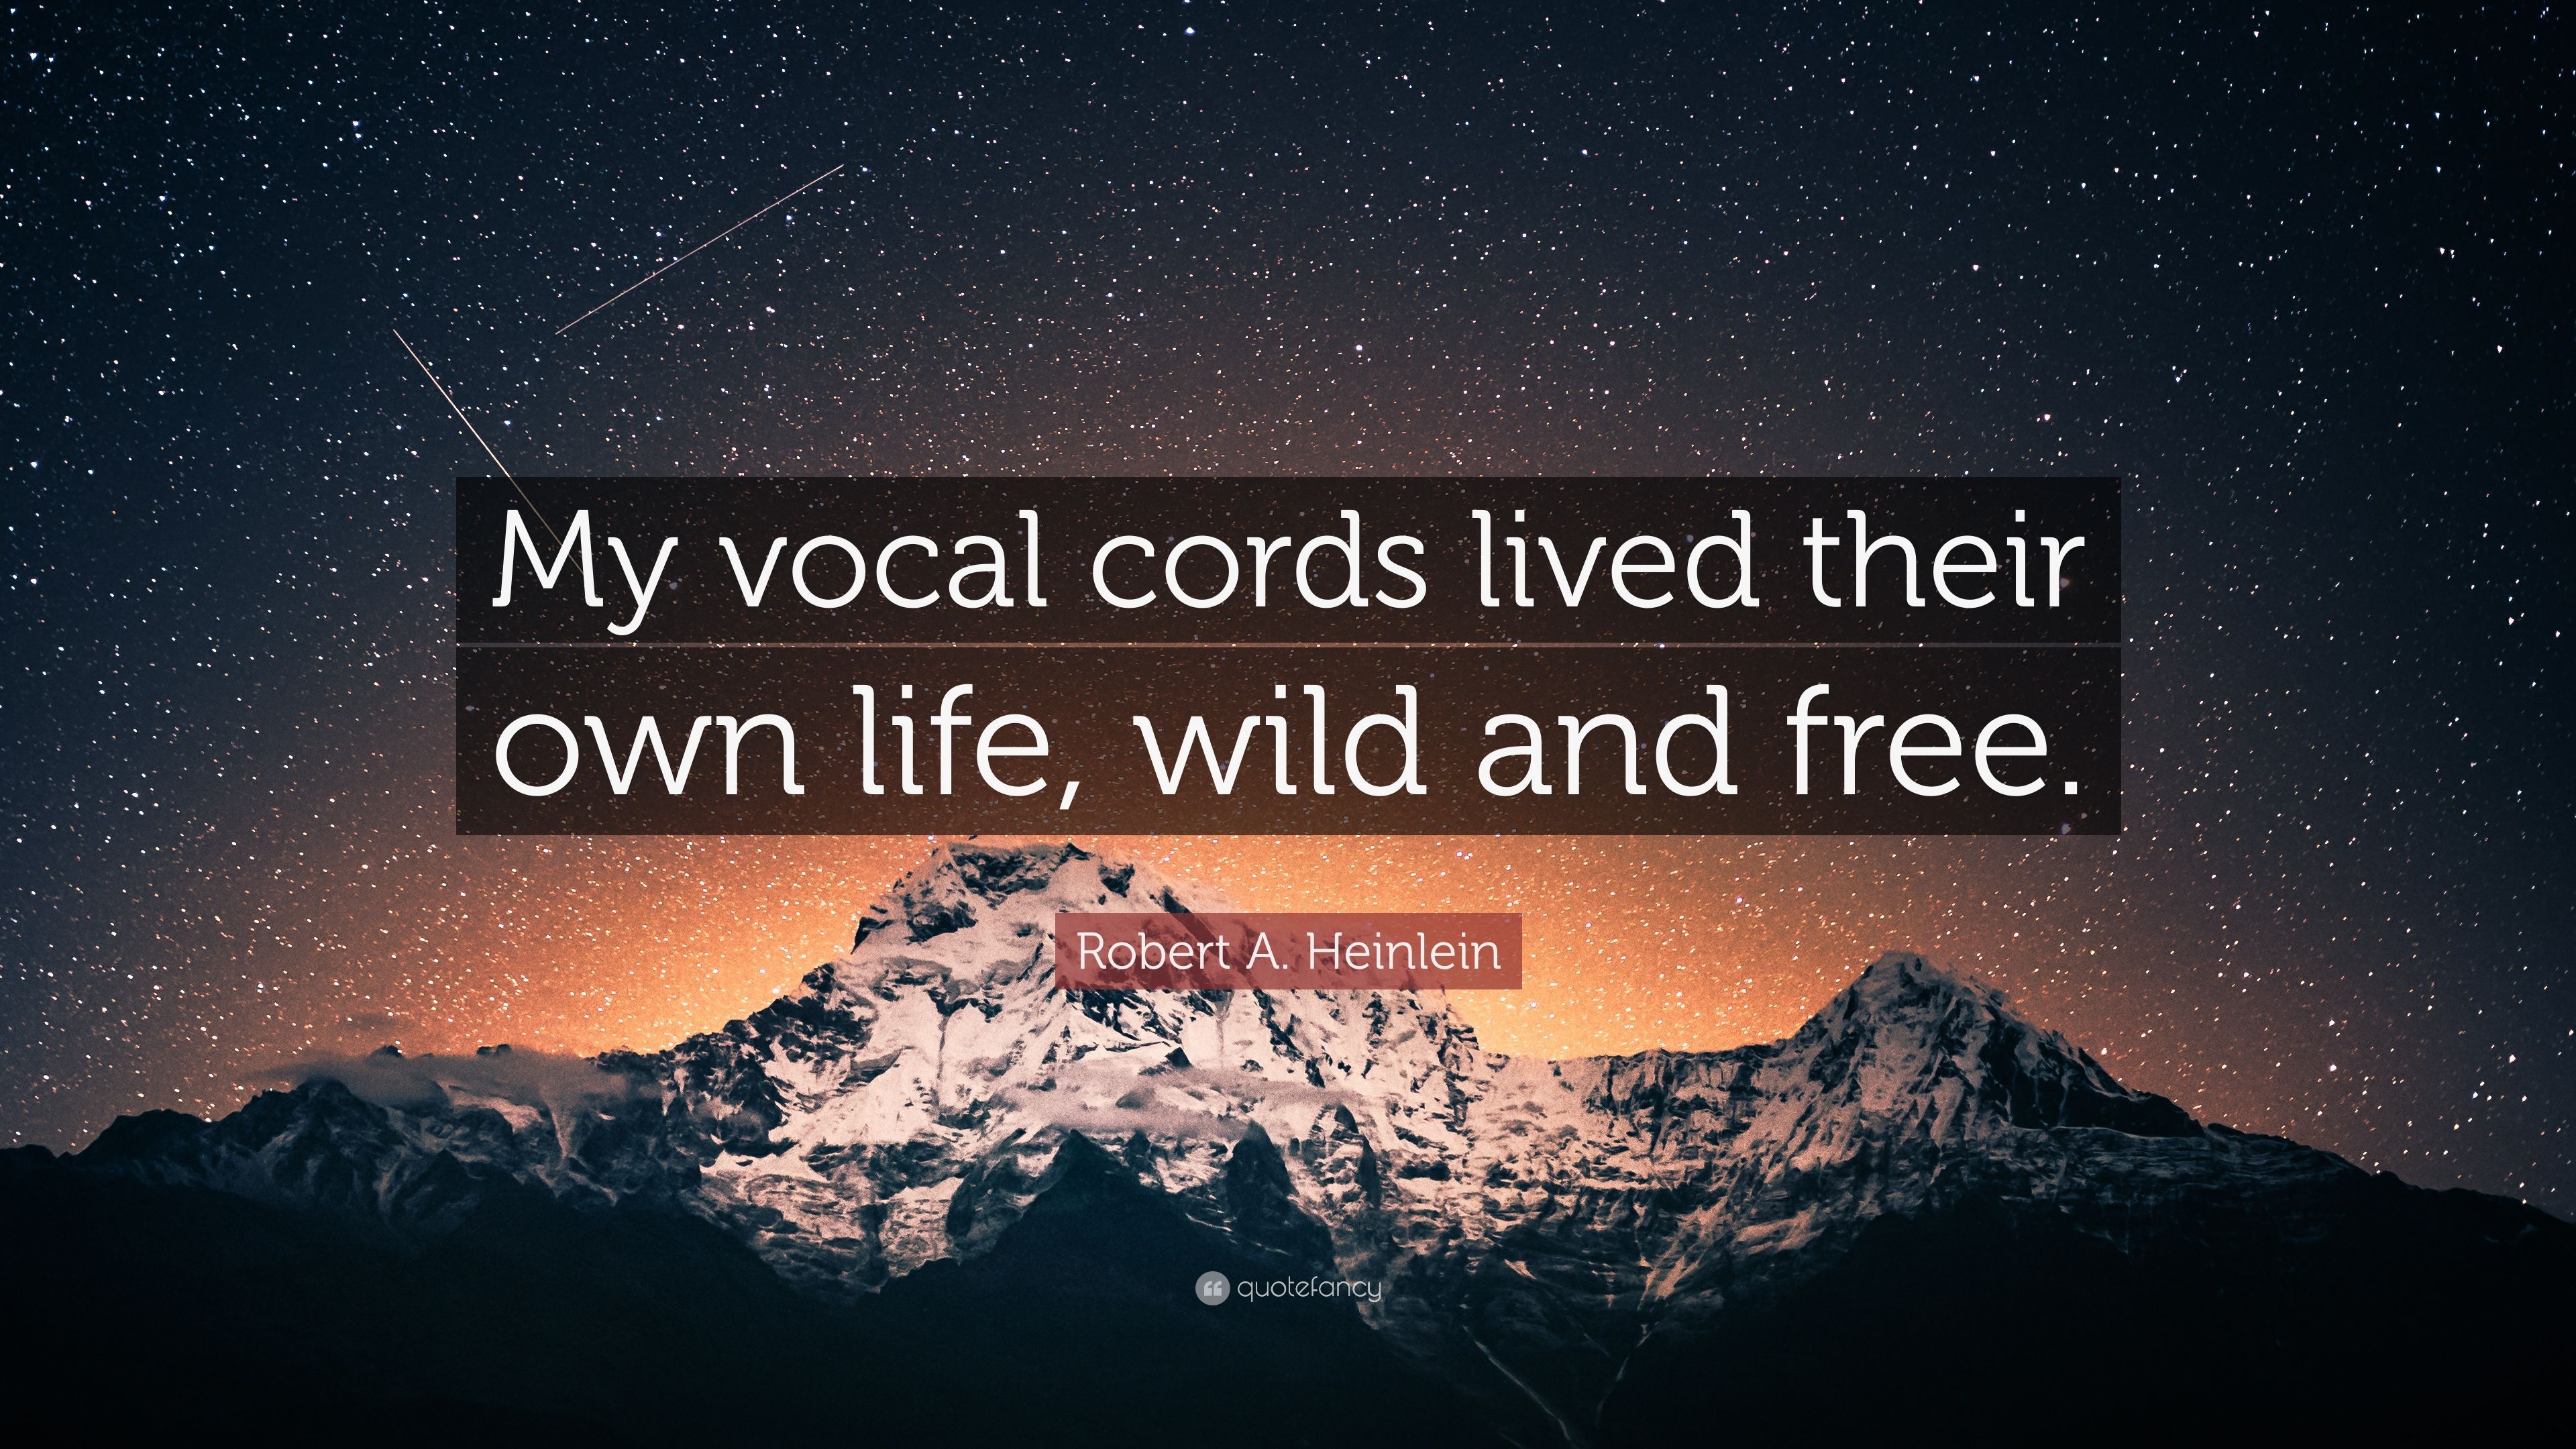 Robert A. Heinlein Quote: “My vocal cords lived their own life, wild and free.” (7 wallpaper)